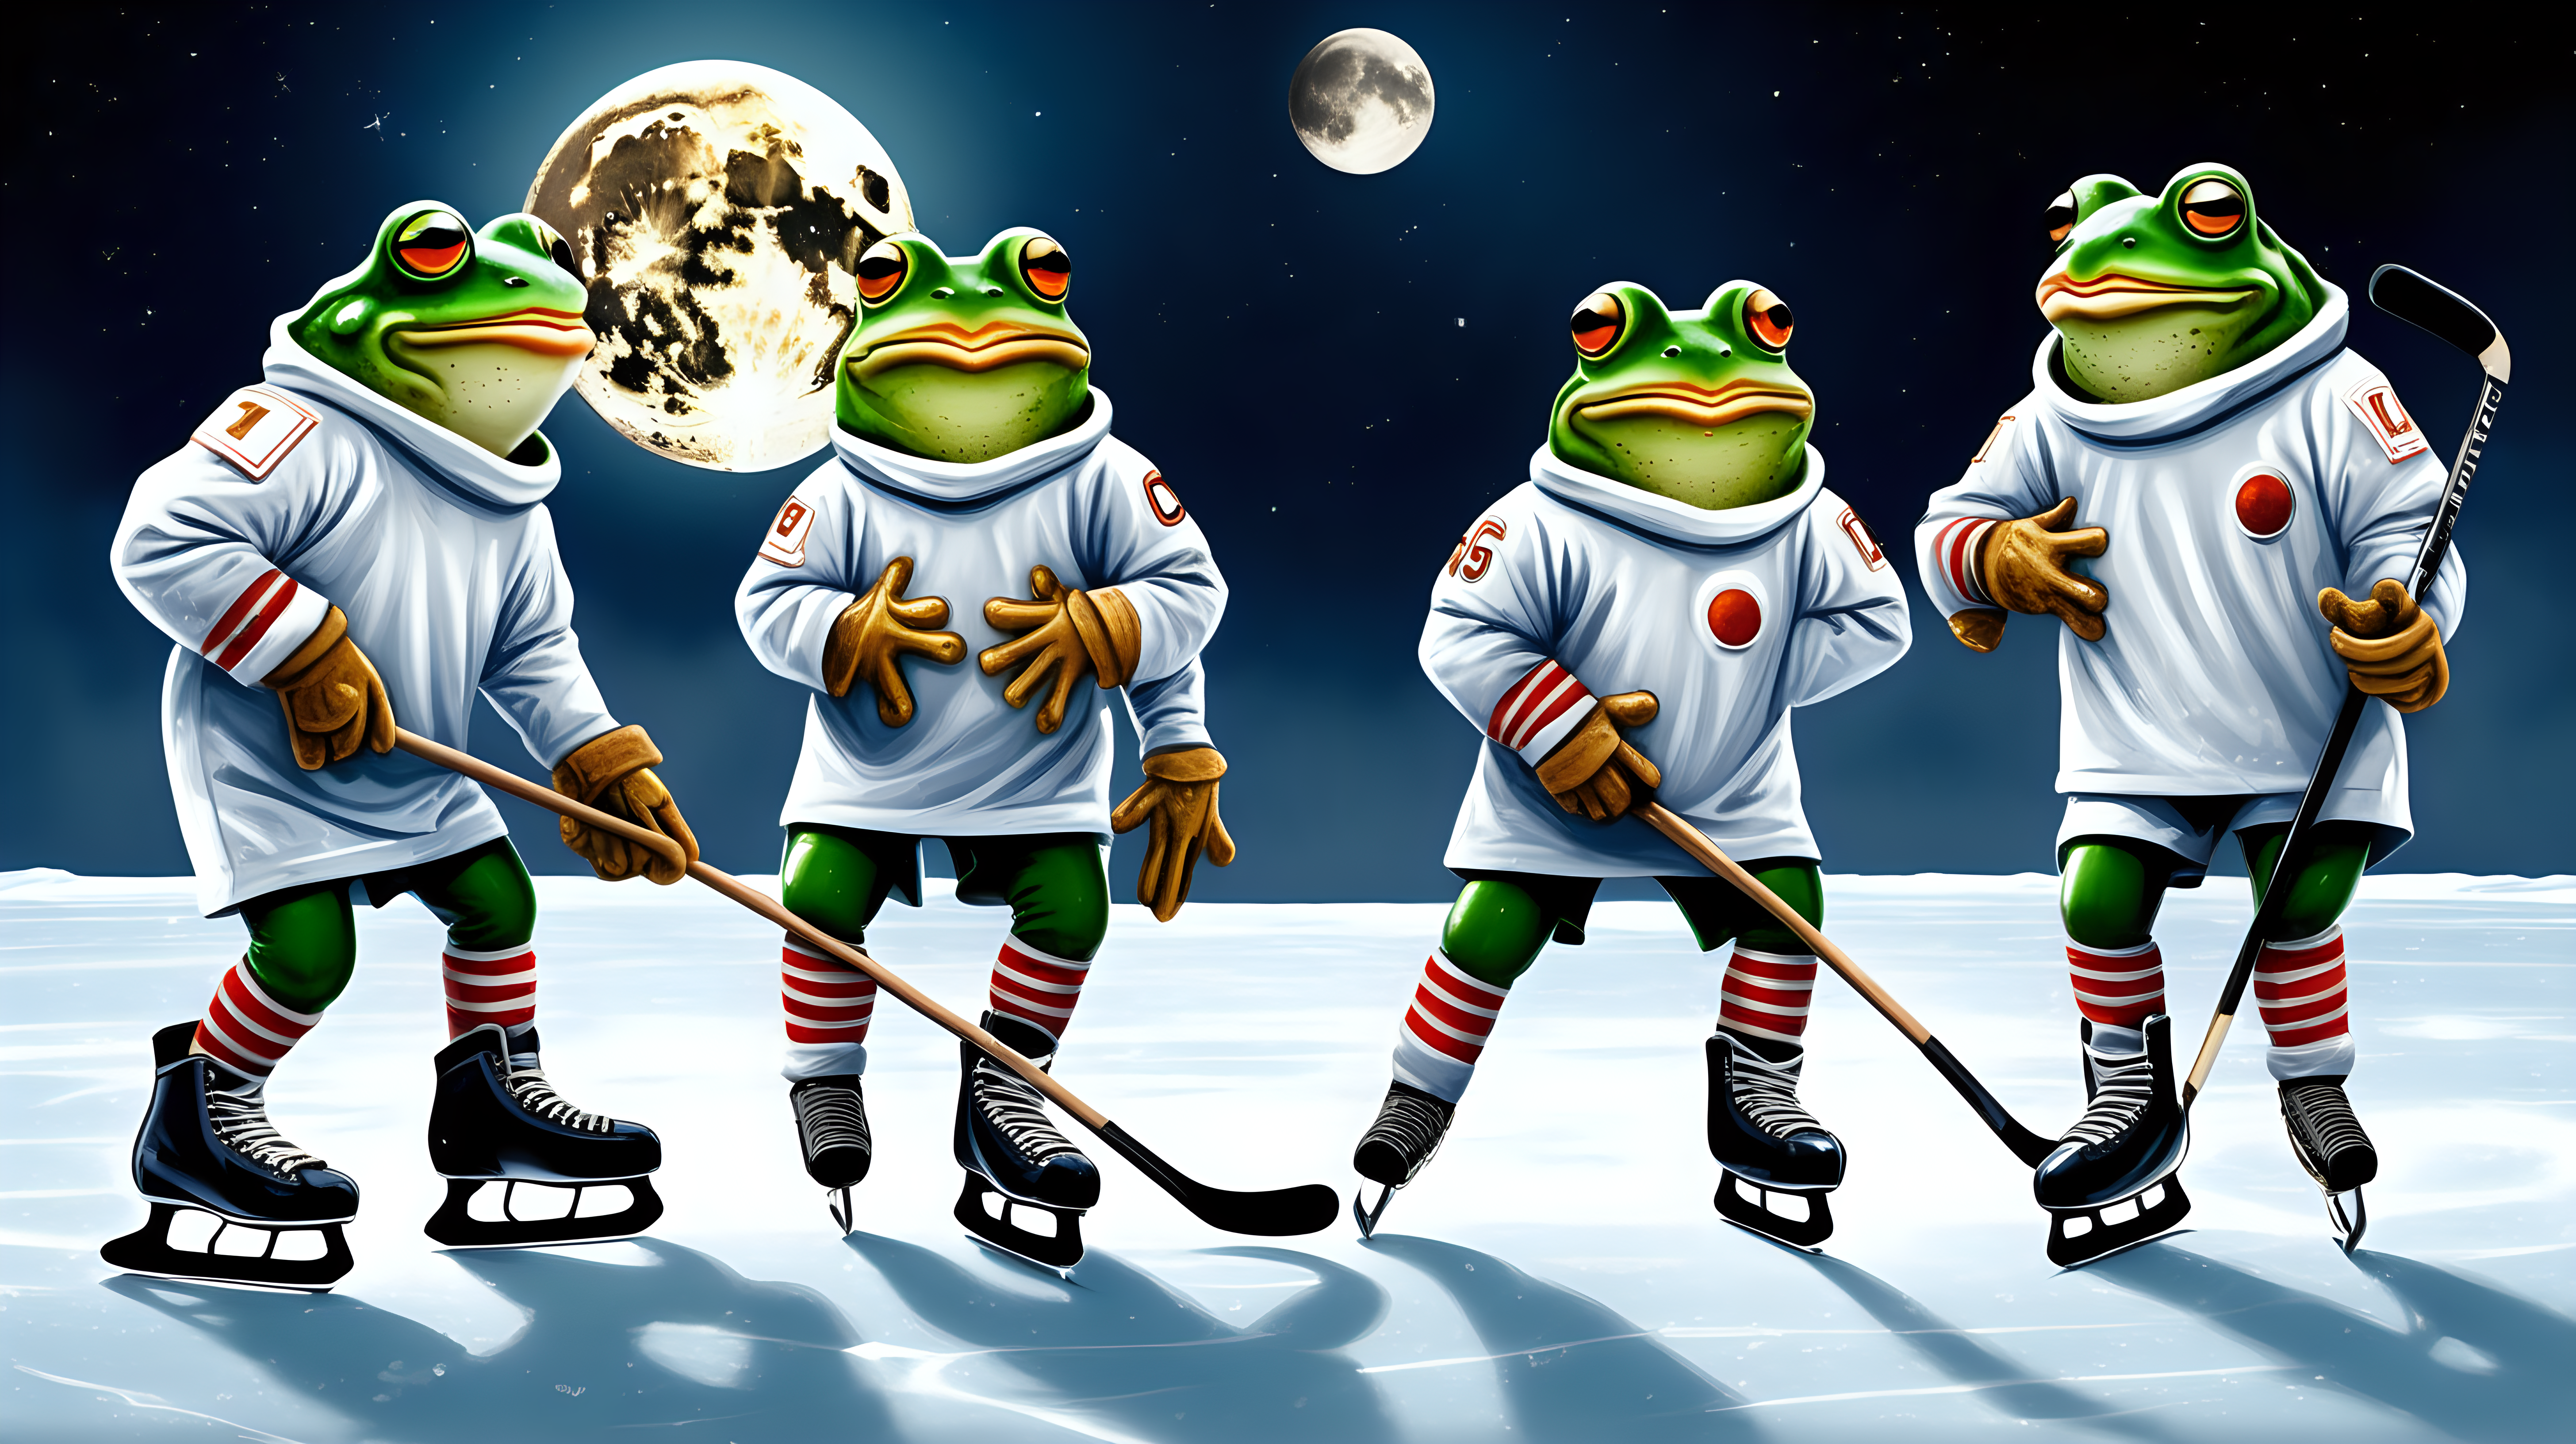 frogs in uniforms on ice skates playing hockey